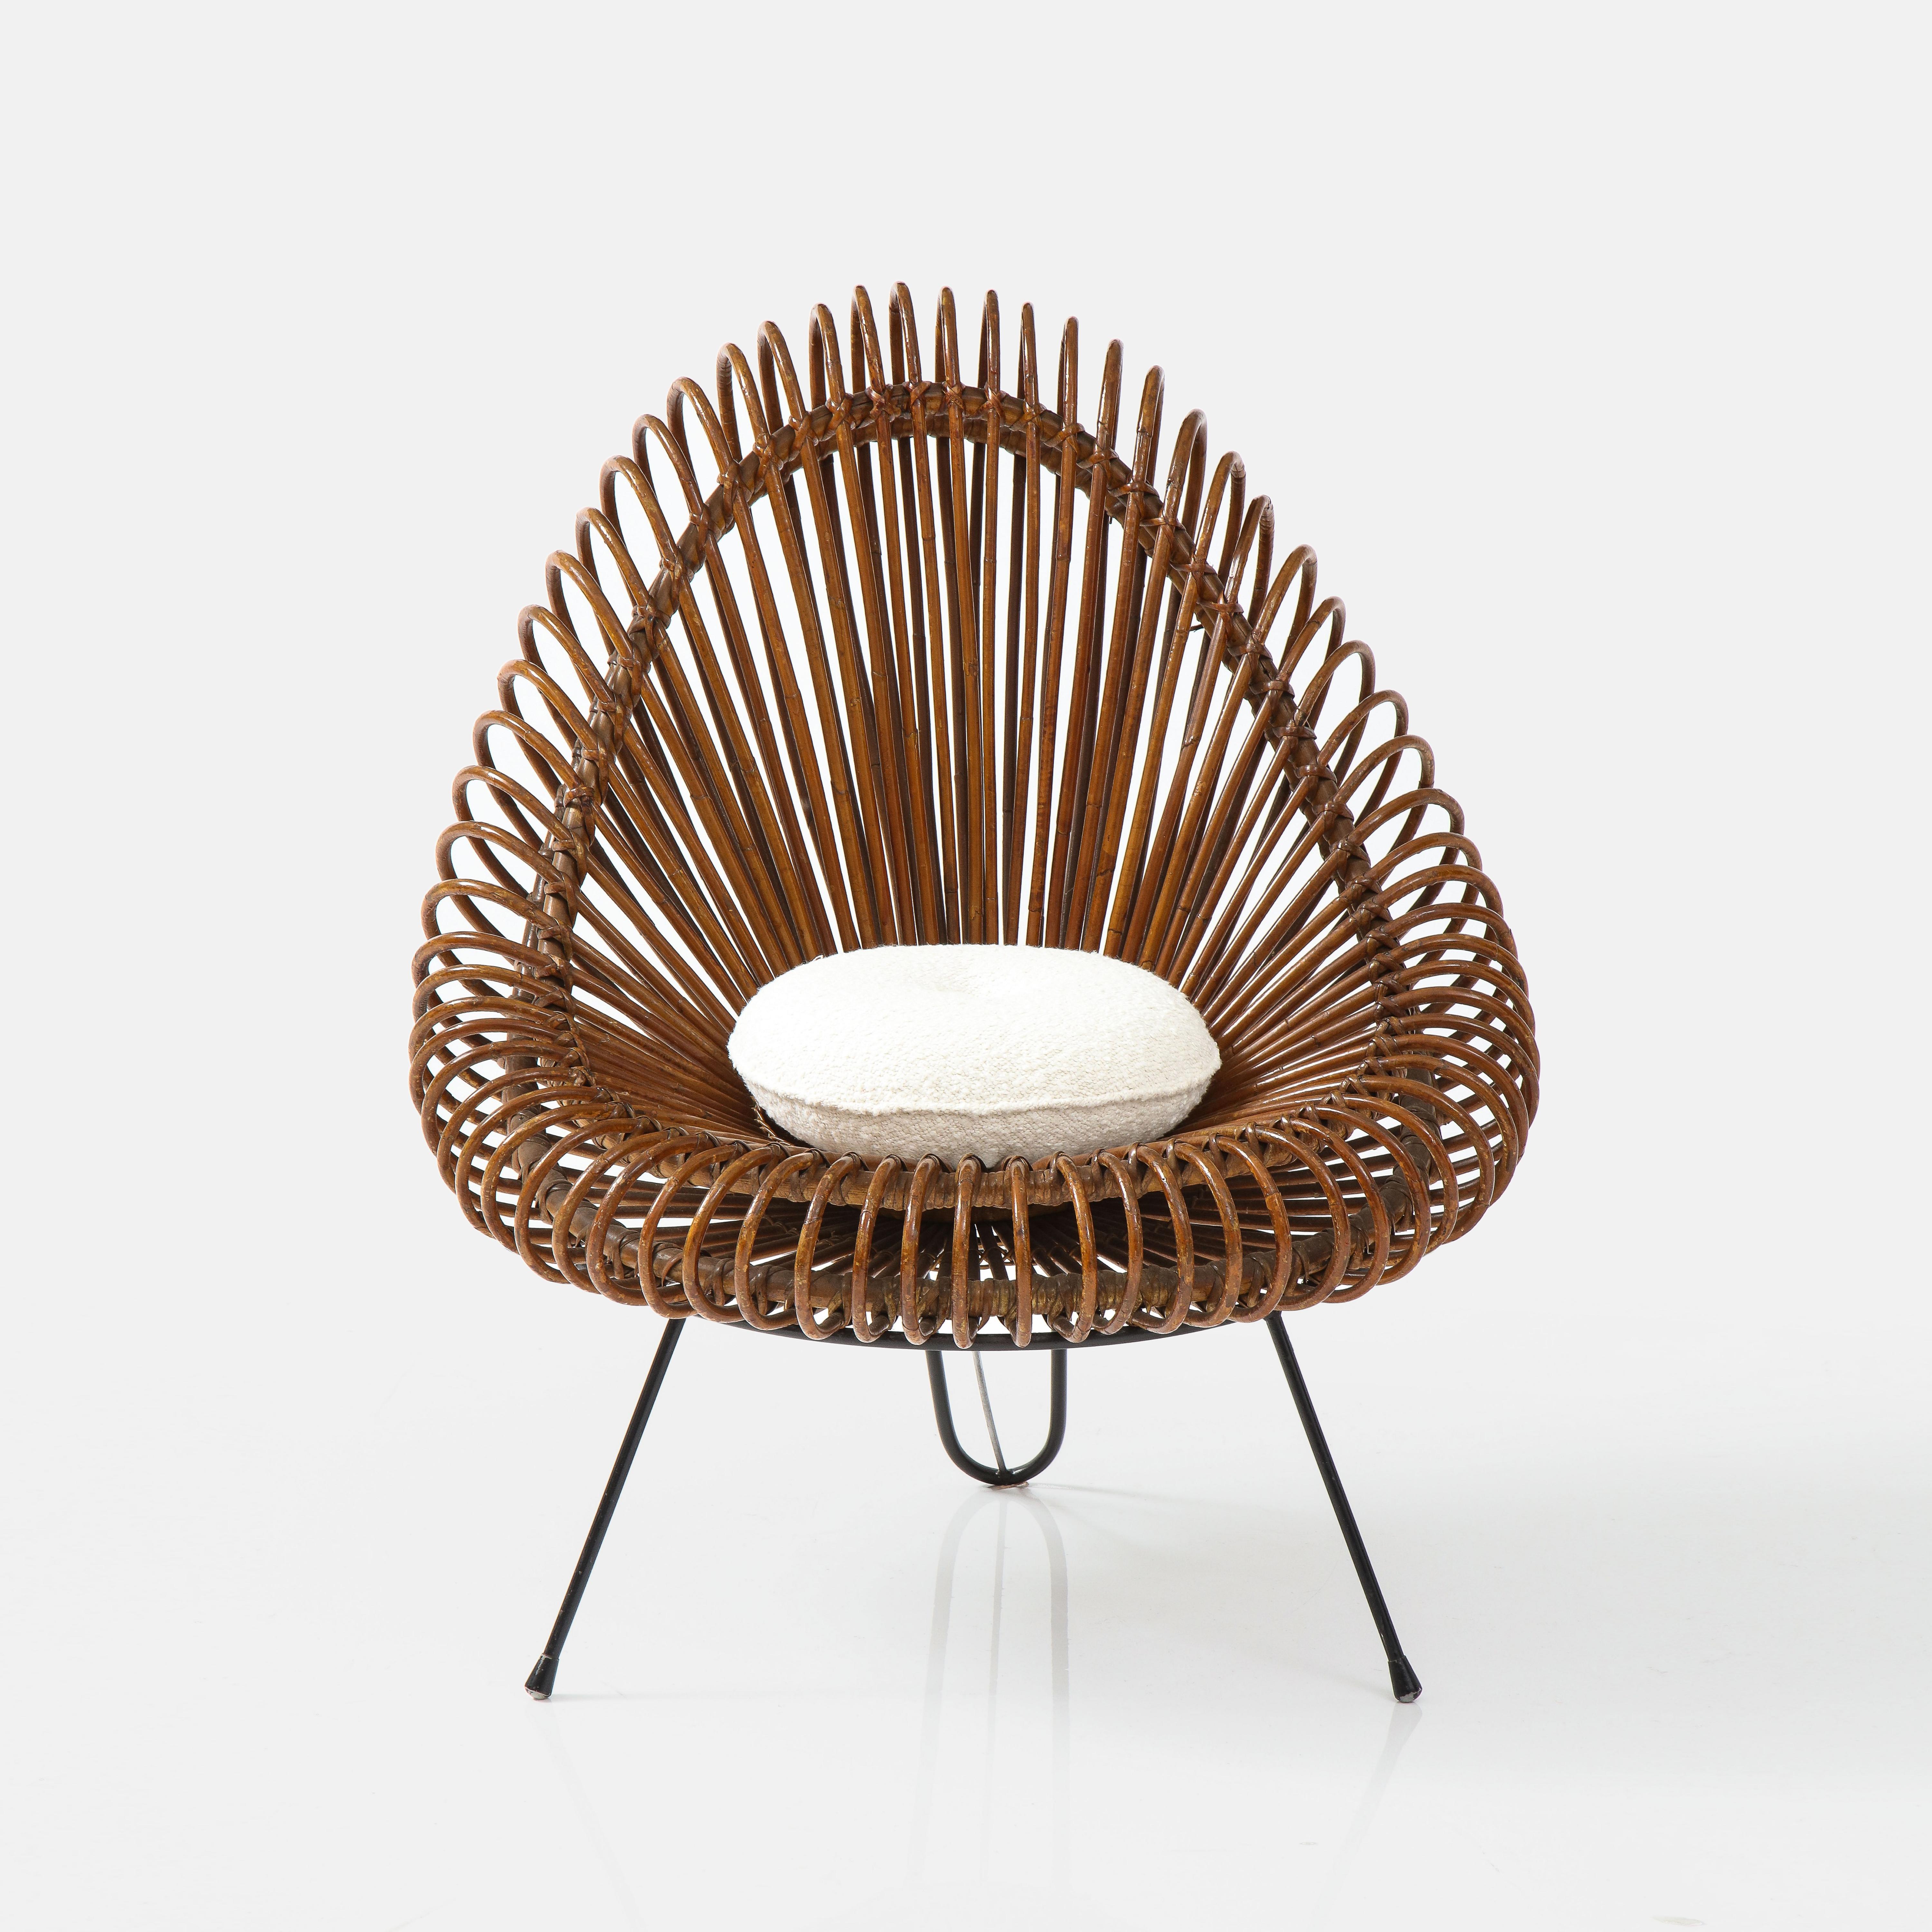 Steel Janine Abraham and Dirk Jan Rol Sculptural Rattan Lounge Chair, France, 1950s For Sale